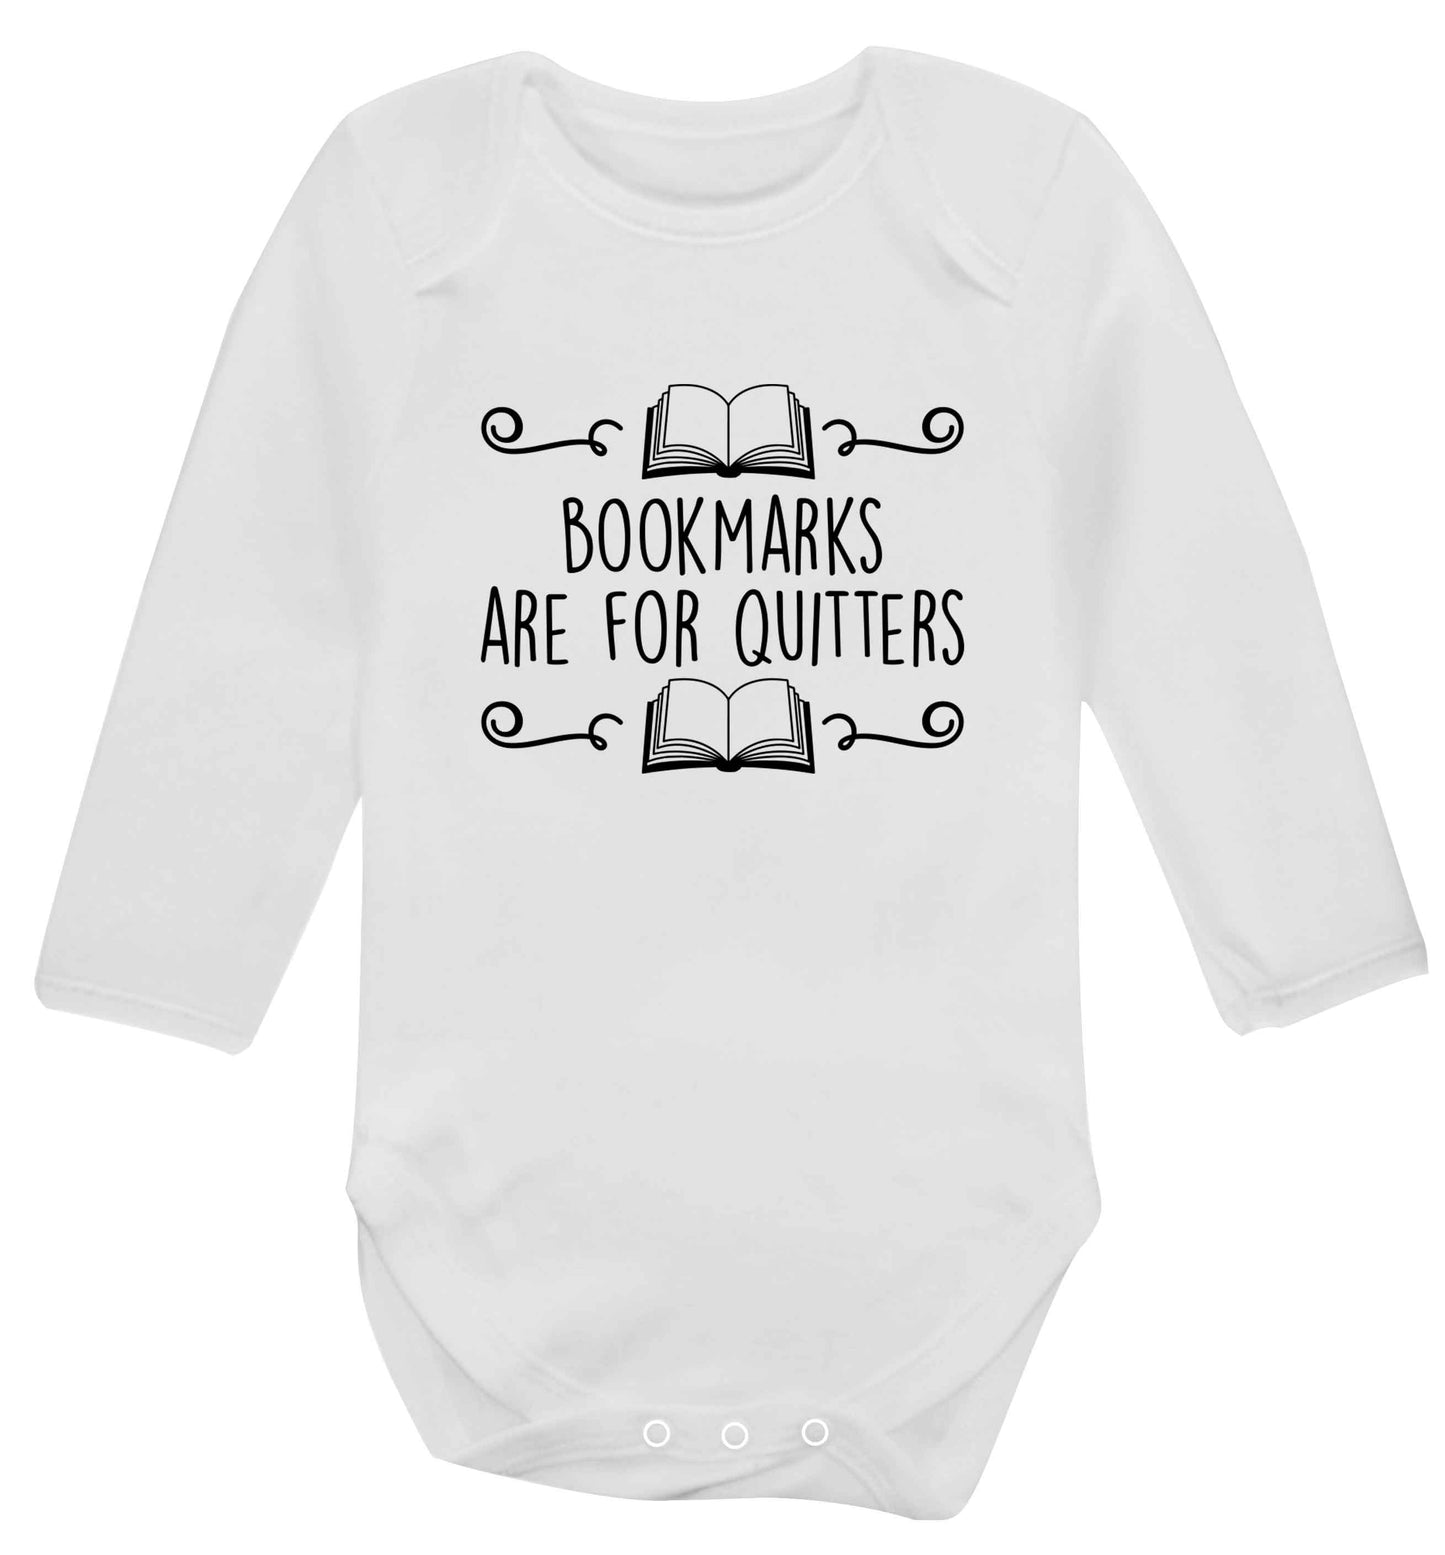 Bookmarks are for quitters baby vest long sleeved white 6-12 months